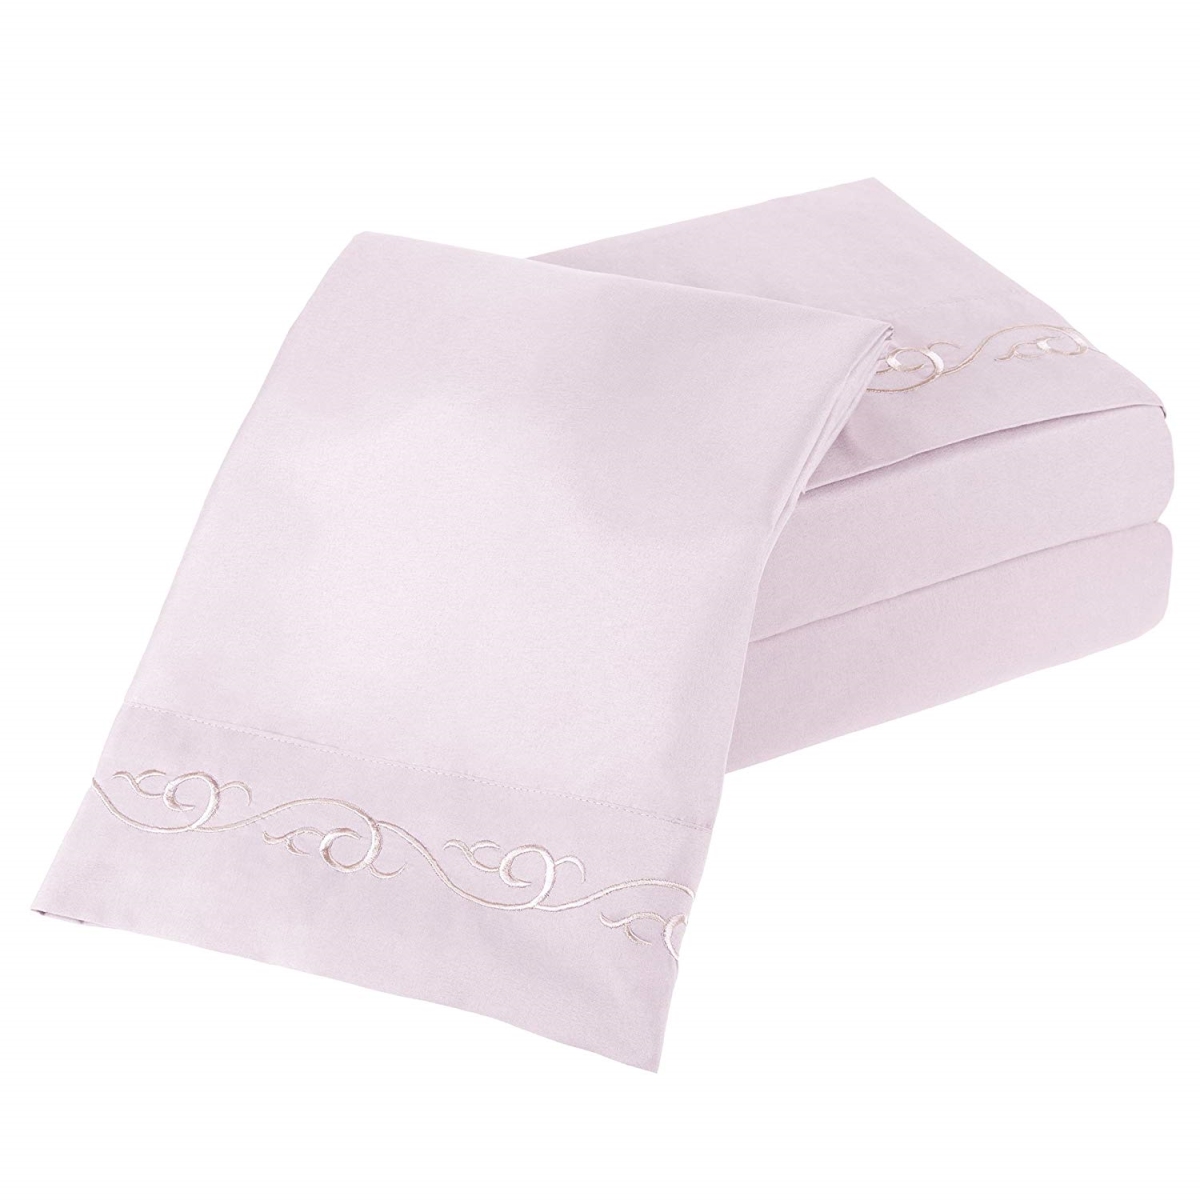 61a-17460 Embroidered Brushed Microfiber Sheets Set, Queen Size - Lavender - 4 Piece